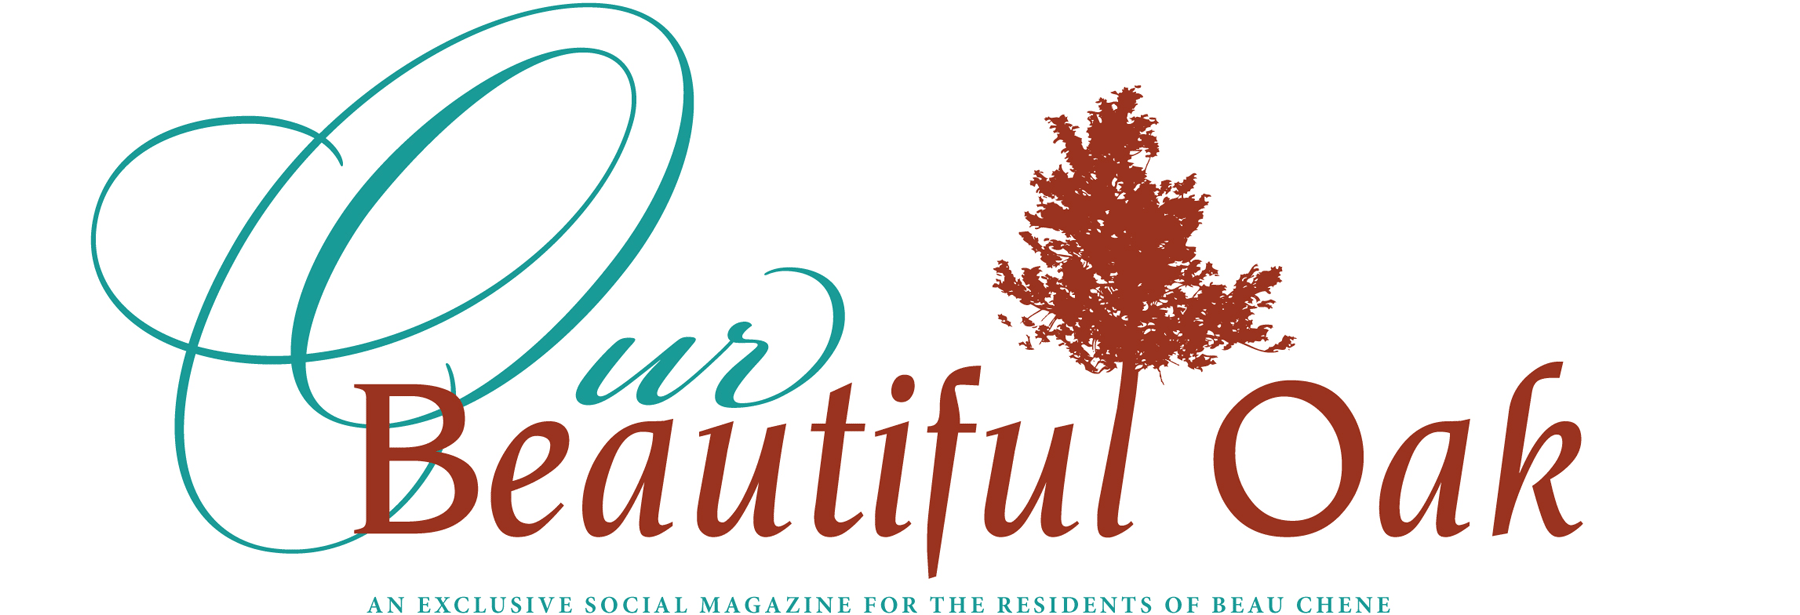 Our Beautiful Oak - An Exclusive Social Magazine for the residents of Beau Chêne